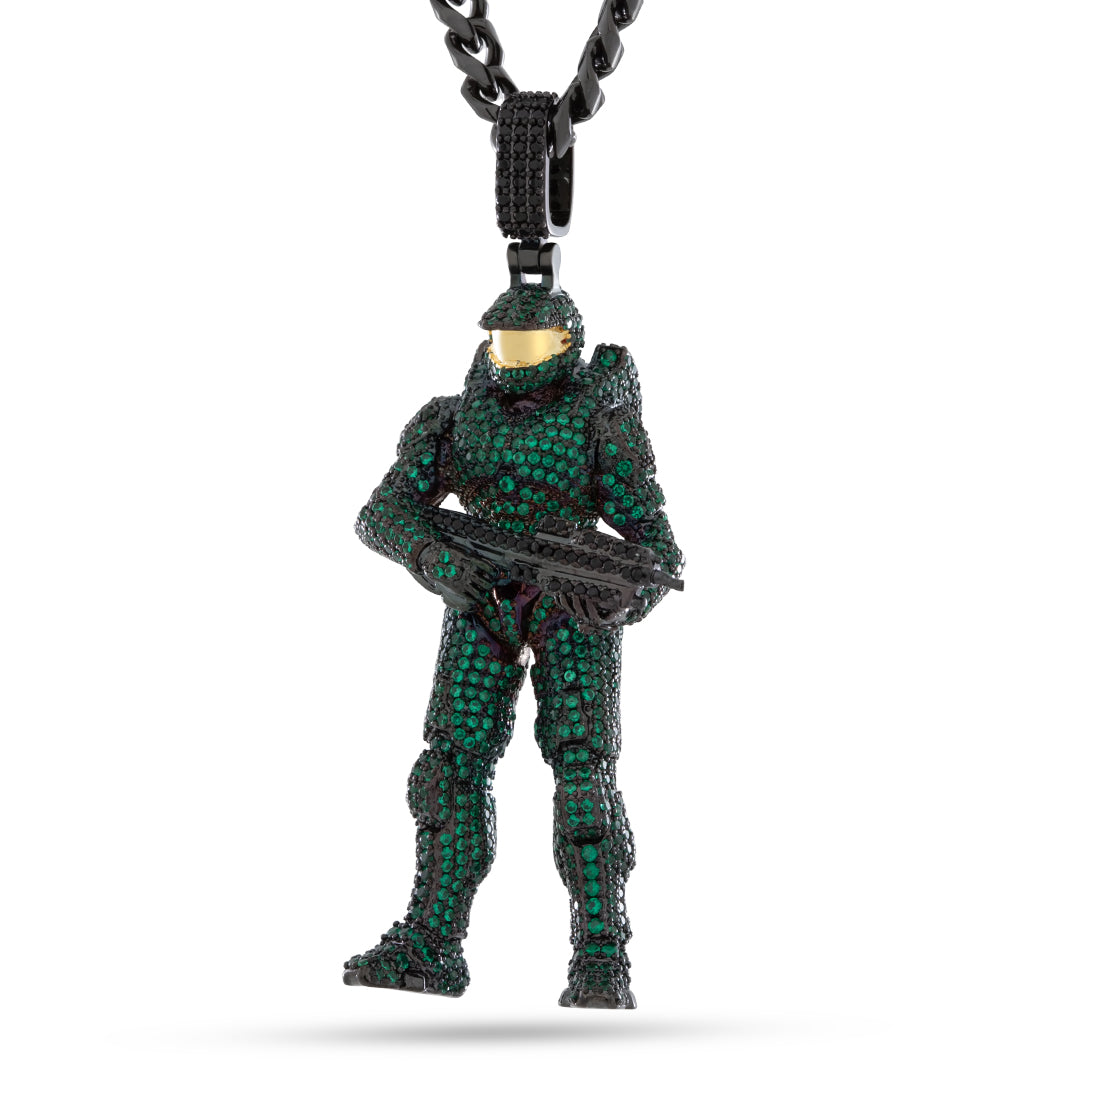 Black Gold / 2.8" Copy of Halo x King Ice - Mark VI Master Chief Necklace